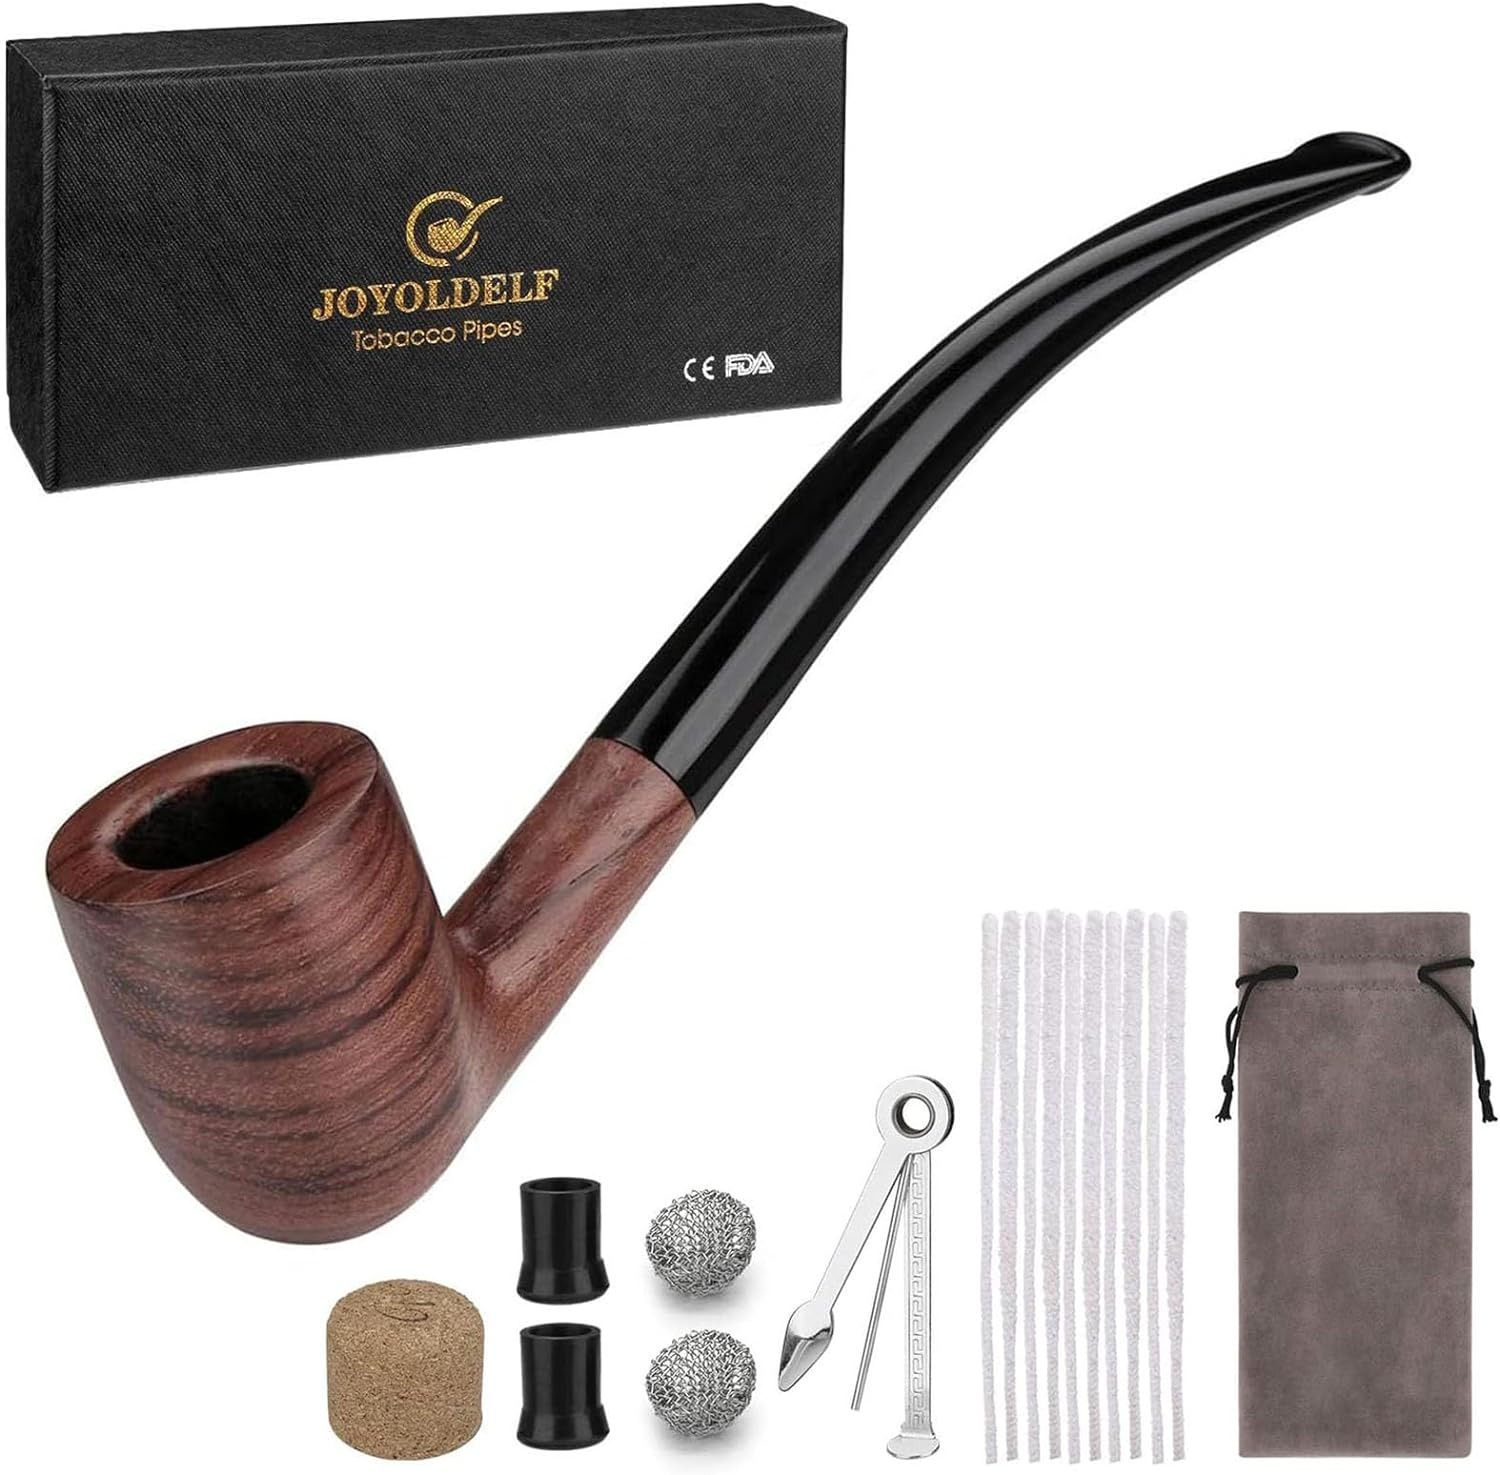 Tobacco Pipe, Churchwarden Smoking Pipe with Metal Pipe Filter, Rosewood Tobacco